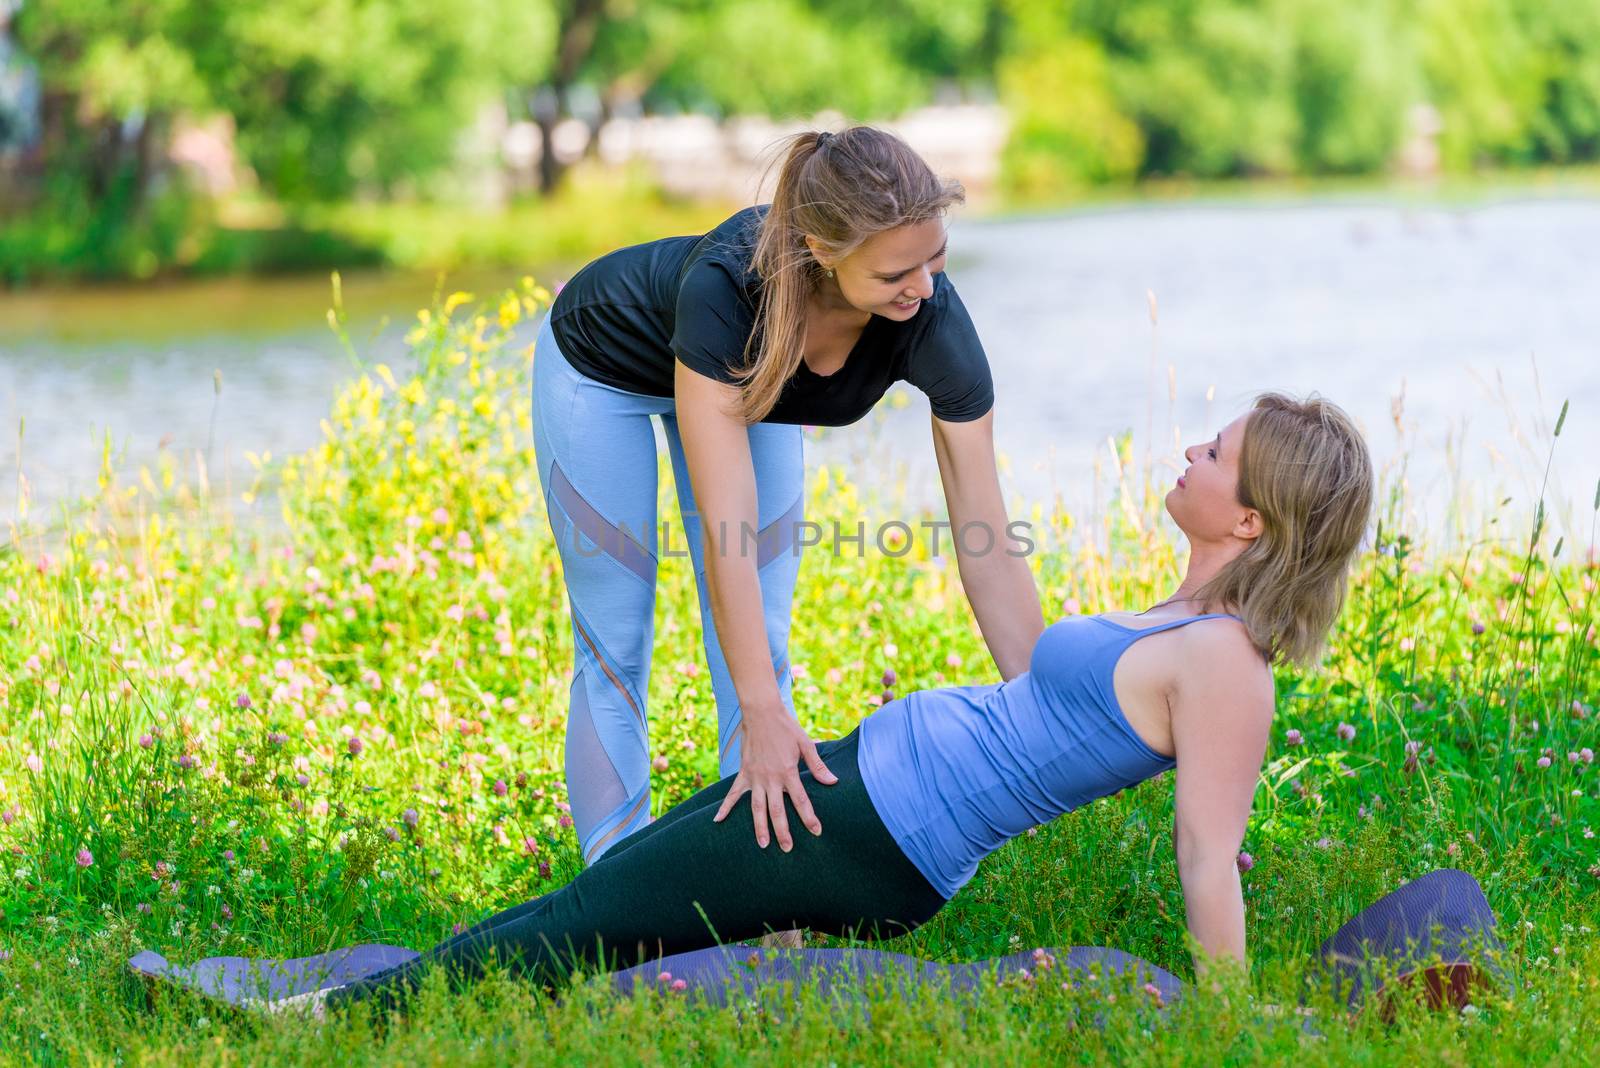 trainer helps to correctly perform yoga exercises to a mature woman, sports in the park in summer